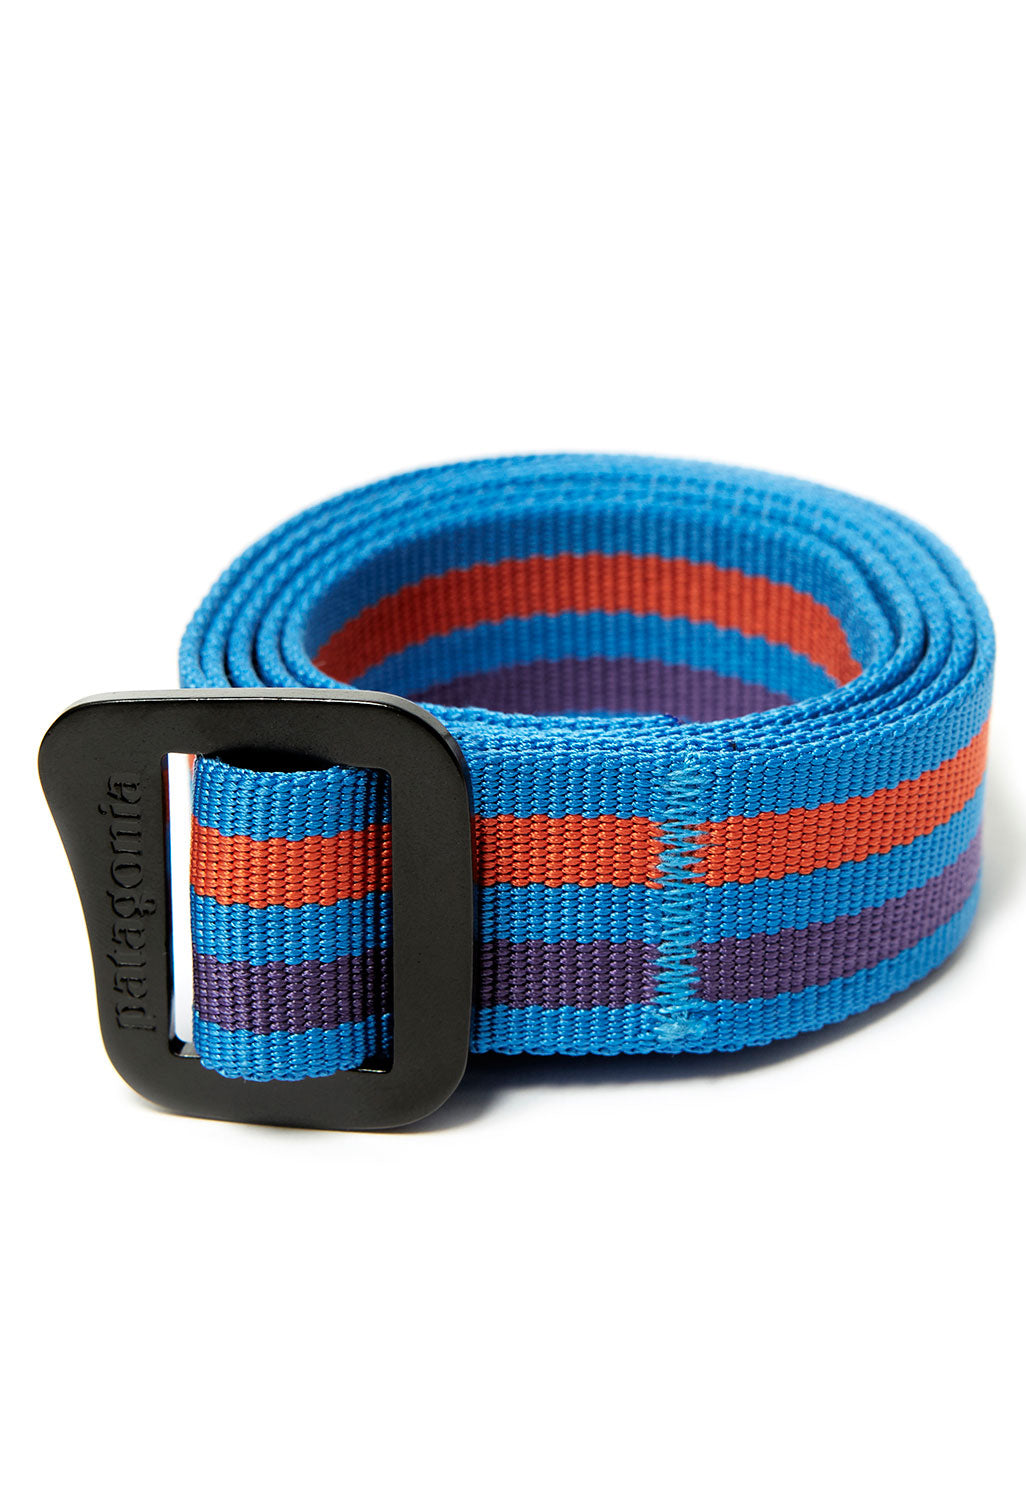 Patagonia Friction Belt - Fitz Roy Andes Blue – Outsiders Store UK